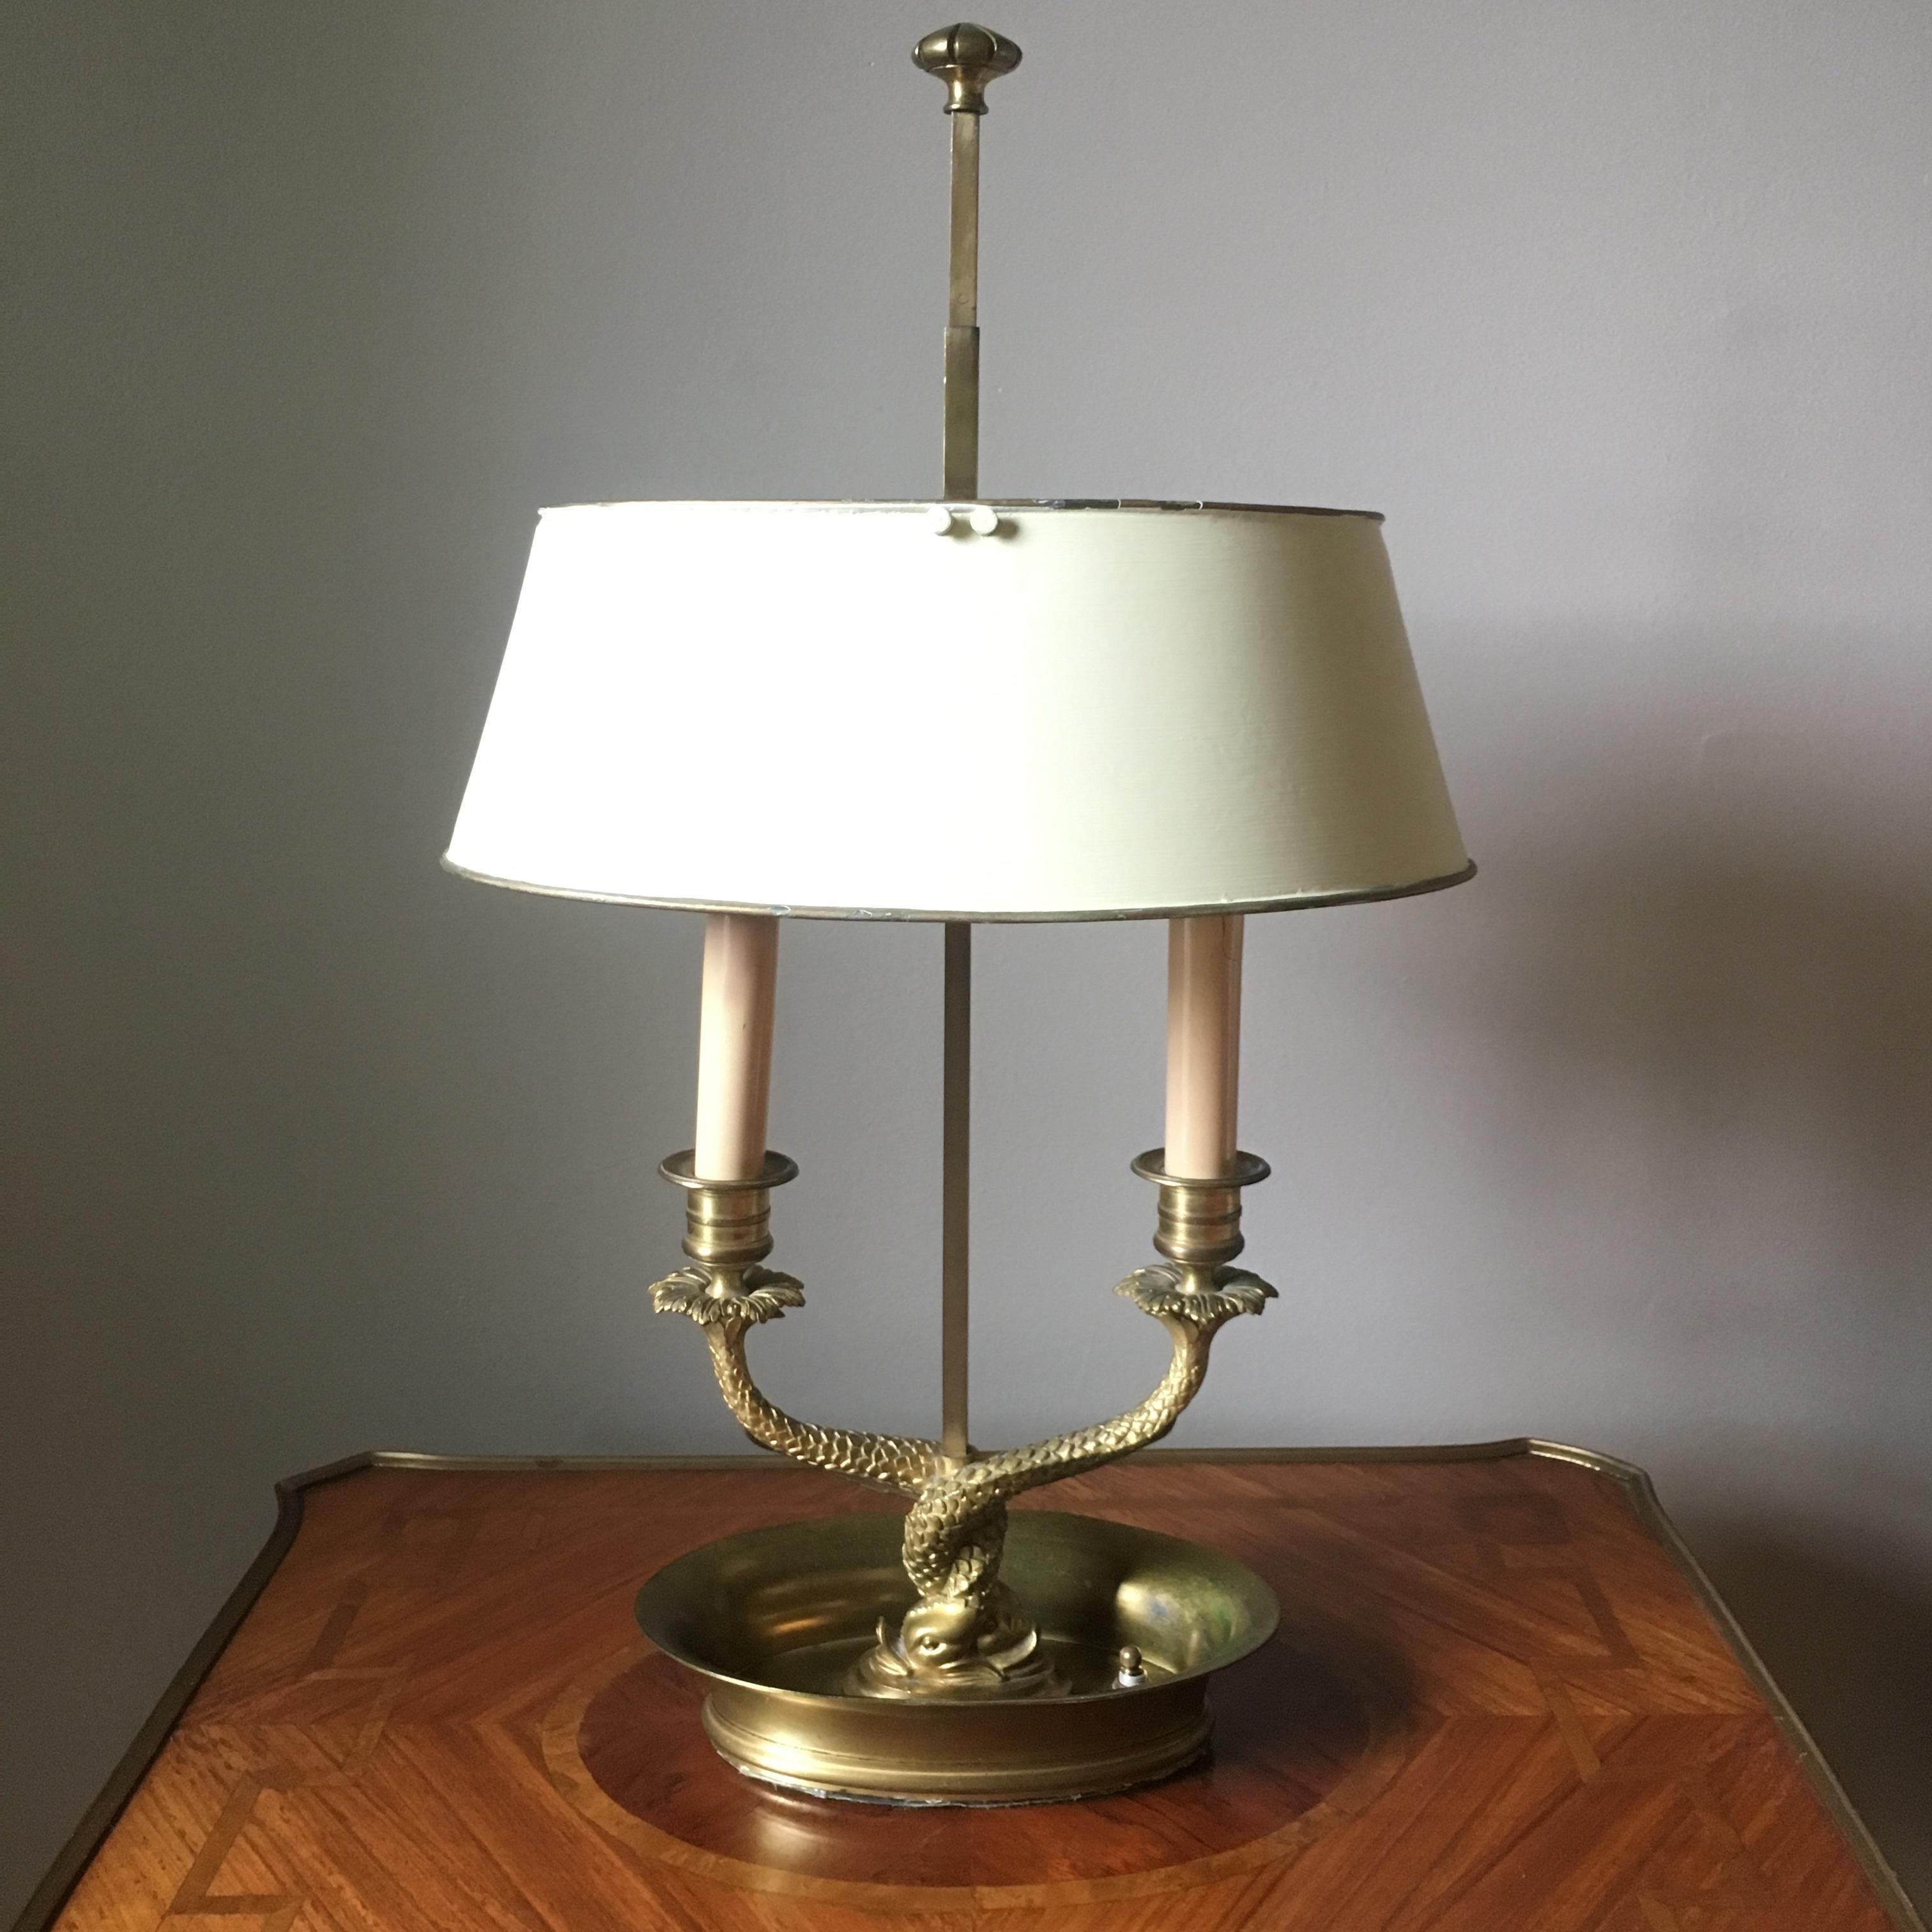 A stunning Neoclassical style brass bouillotte lamp with twin dolphins at the base and a cream colored tole shade. 

Early 20th Century

Dimensions: 12ʺW × 8ʺD × 21ʺH

Good vintage condition. Minor surface wear expected with age and use. Lamp powers